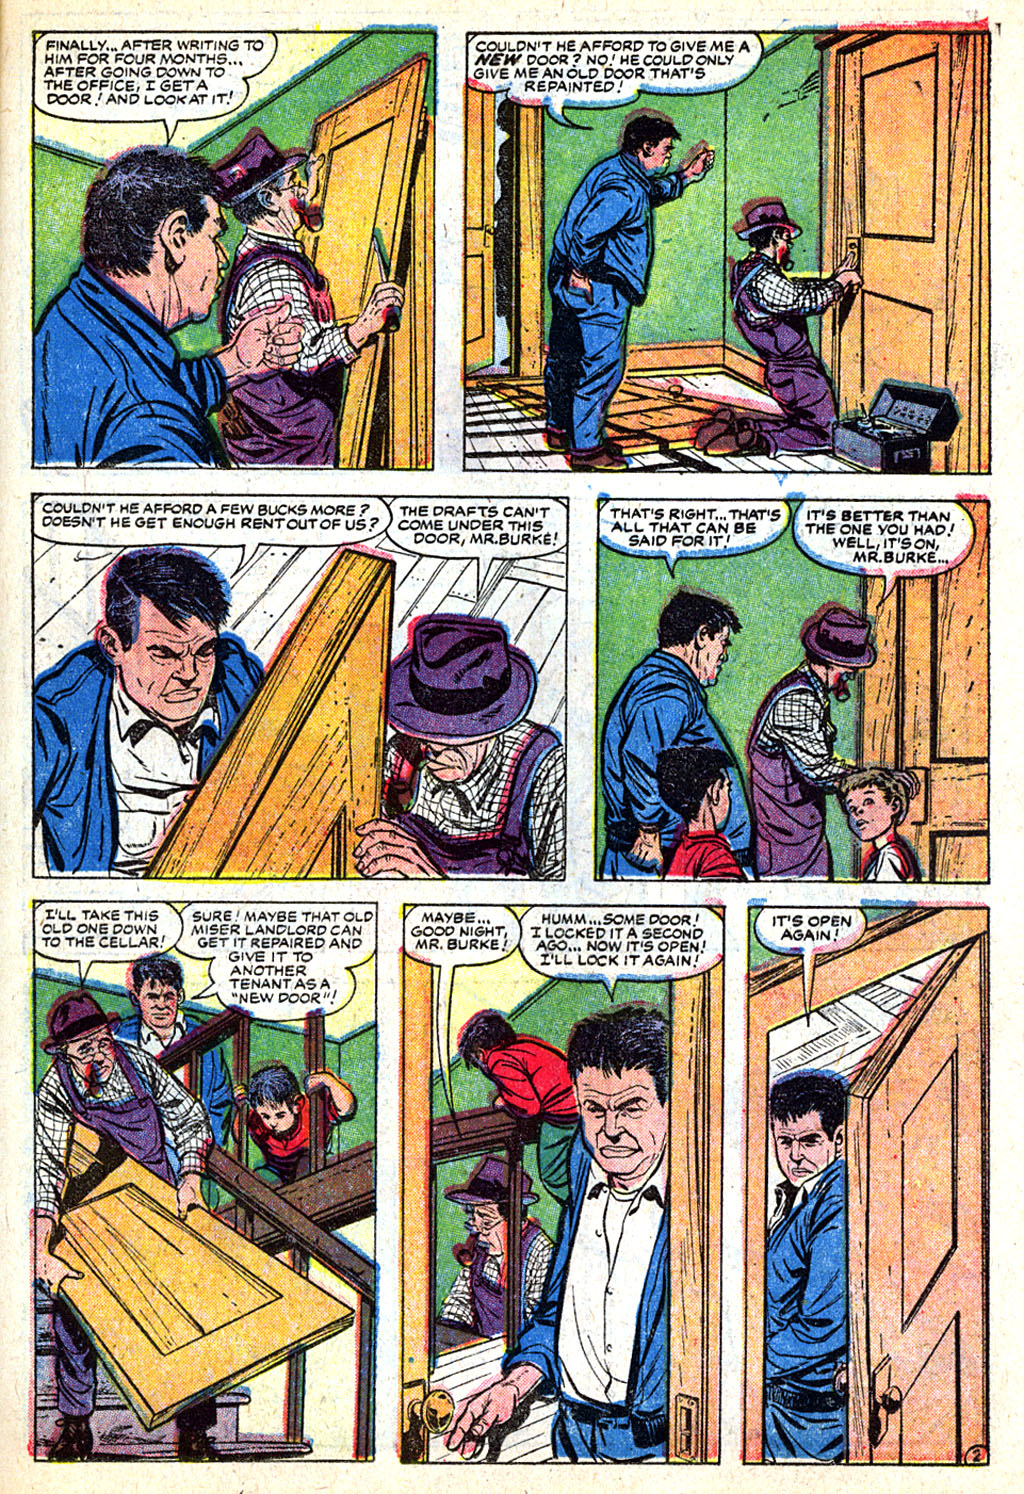 Marvel Tales (1949) 137 Page 10